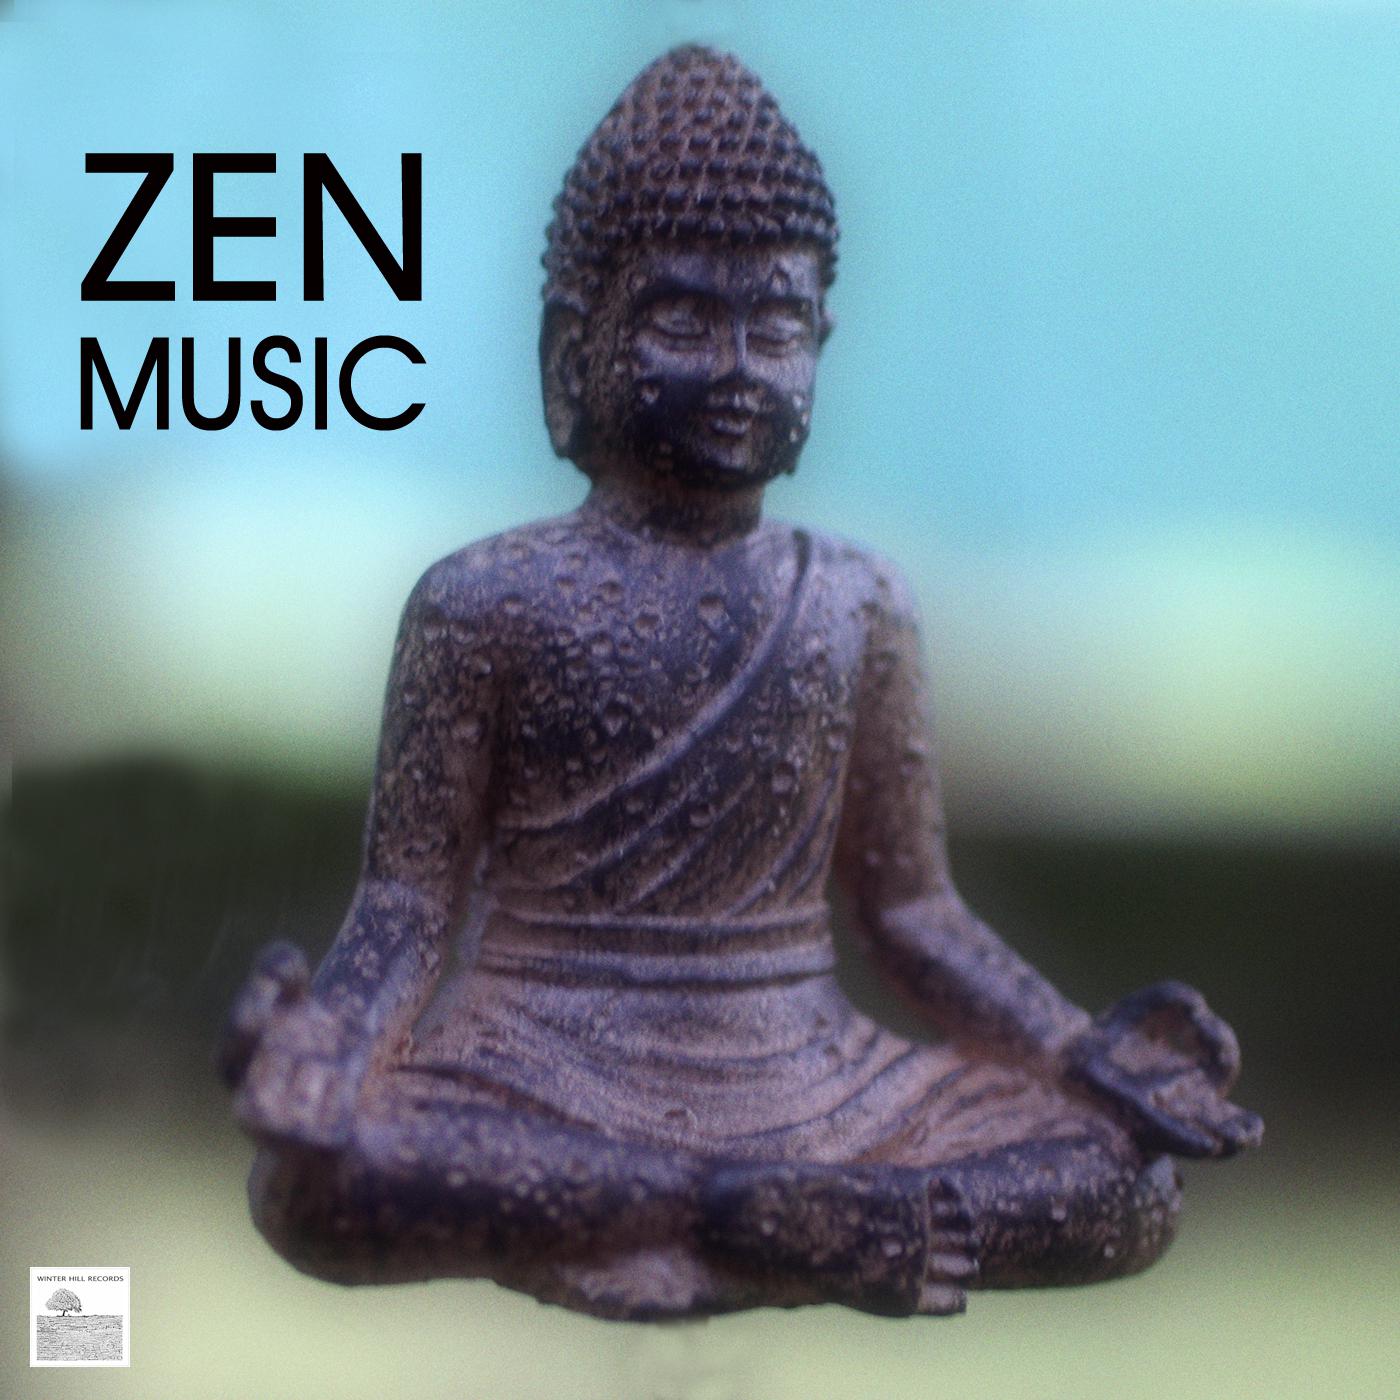 No More Stress - Relaxing Piano Music for Well Being, Wellness and Relaxation